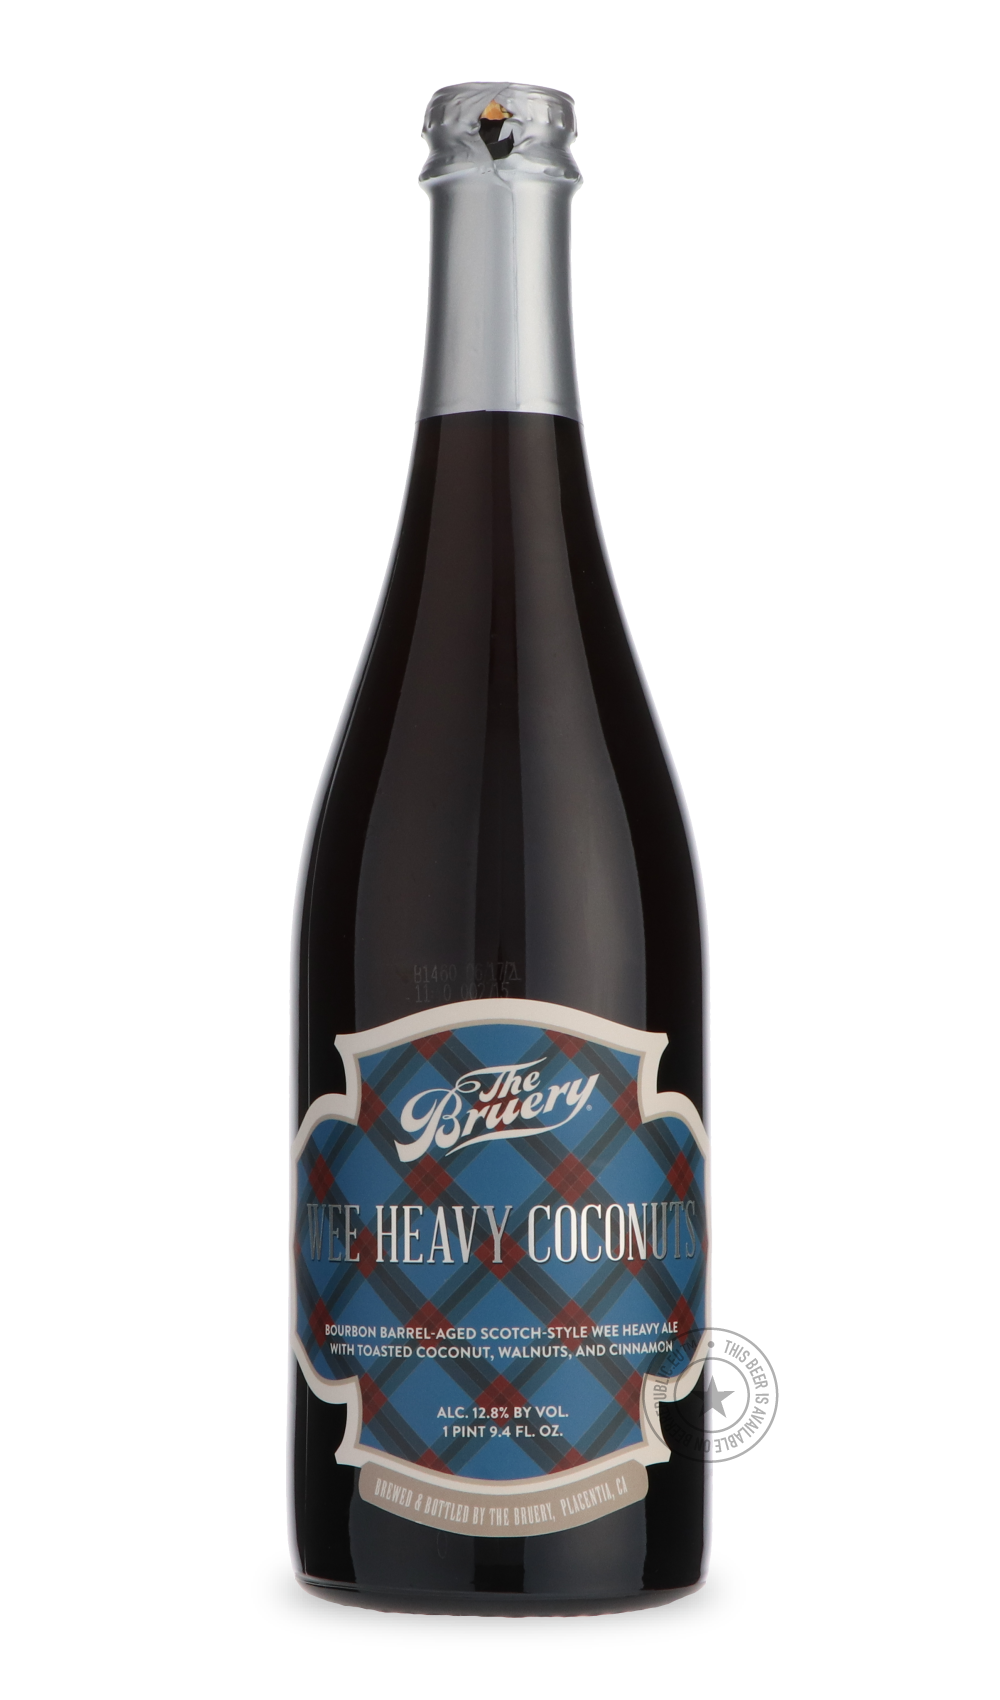 -The Bruery- Wee Heavy Coconuts-Brown & Dark- Only @ Beer Republic - The best online beer store for American & Canadian craft beer - Buy beer online from the USA and Canada - Bier online kopen - Amerikaans bier kopen - Craft beer store - Craft beer kopen - Amerikanisch bier kaufen - Bier online kaufen - Acheter biere online - IPA - Stout - Porter - New England IPA - Hazy IPA - Imperial Stout - Barrel Aged - Barrel Aged Imperial Stout - Brown - Dark beer - Blond - Blonde - Pilsner - Lager - Wheat - Weizen - 